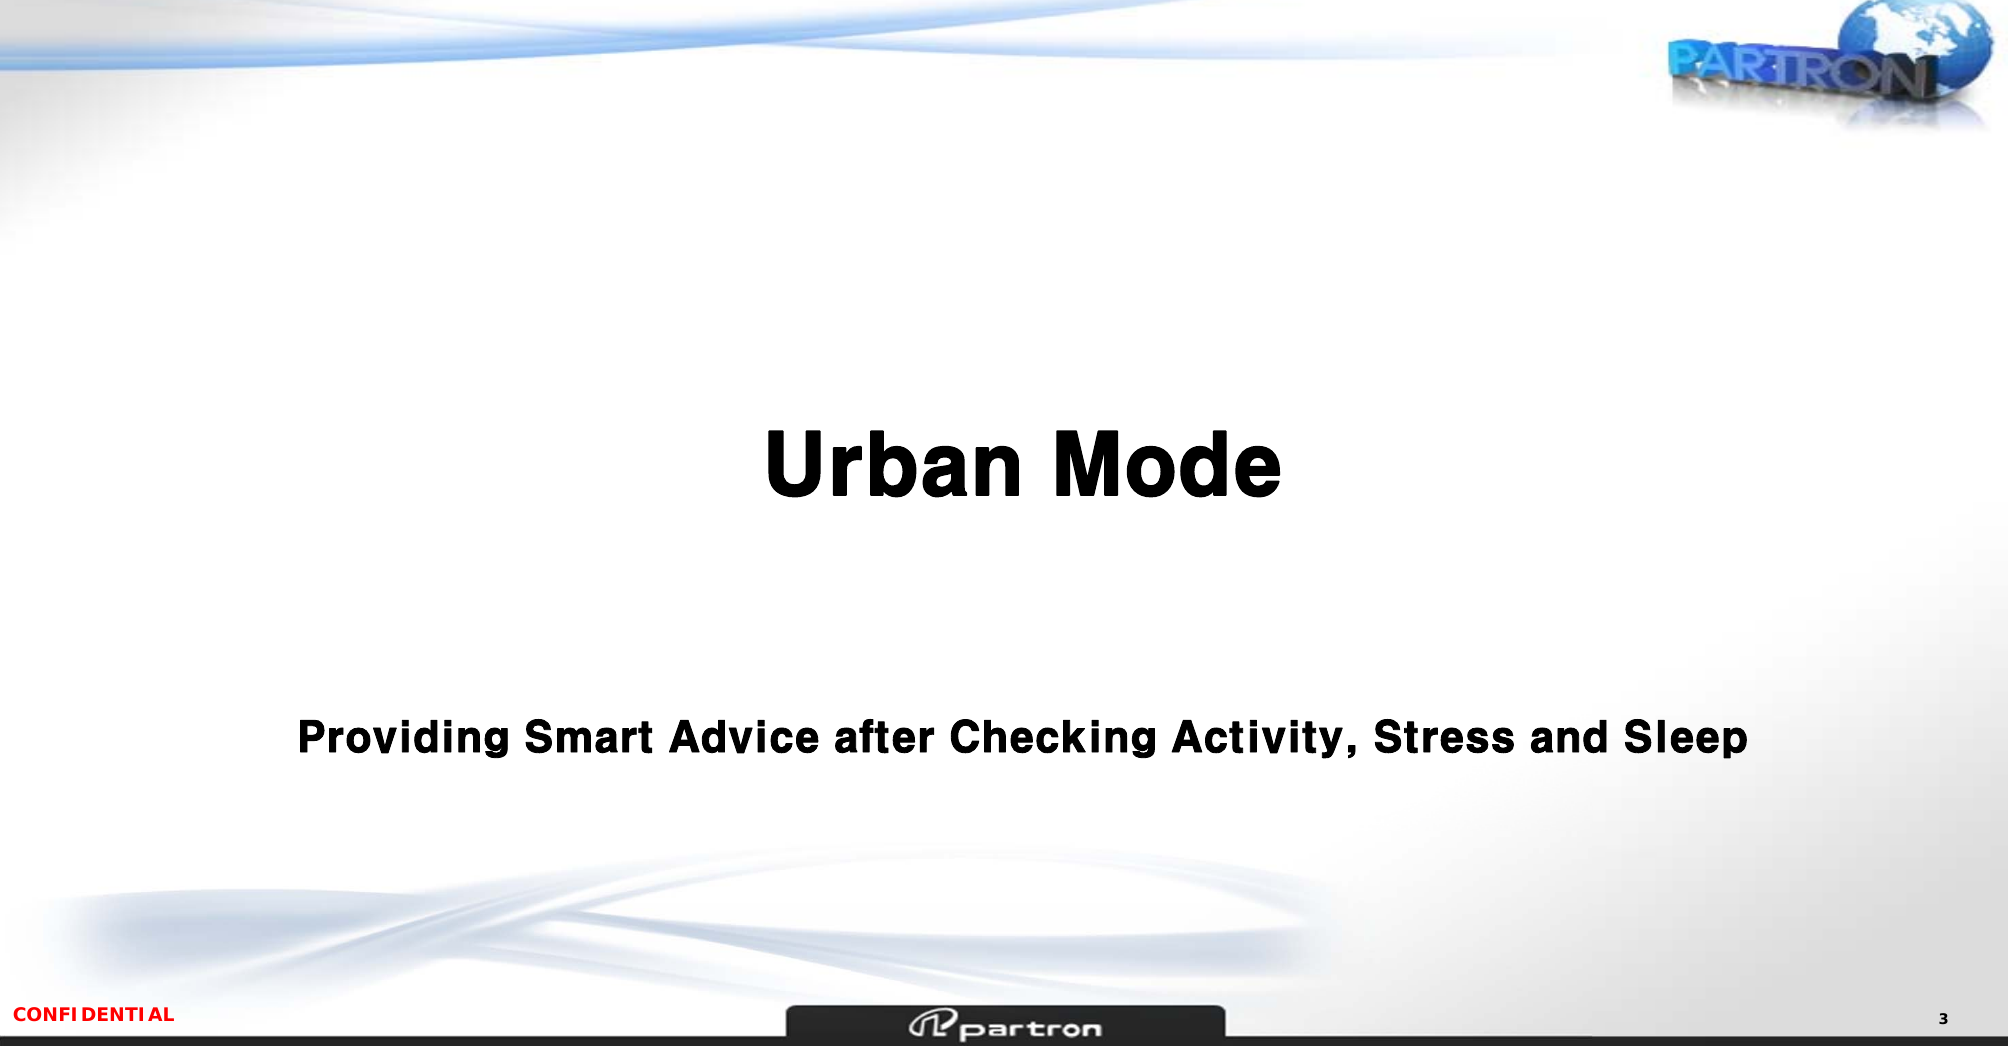 CONFIDENTIAL 3Urban ModeProviding Smart Advice after Checking Activity, Stress and Sleep